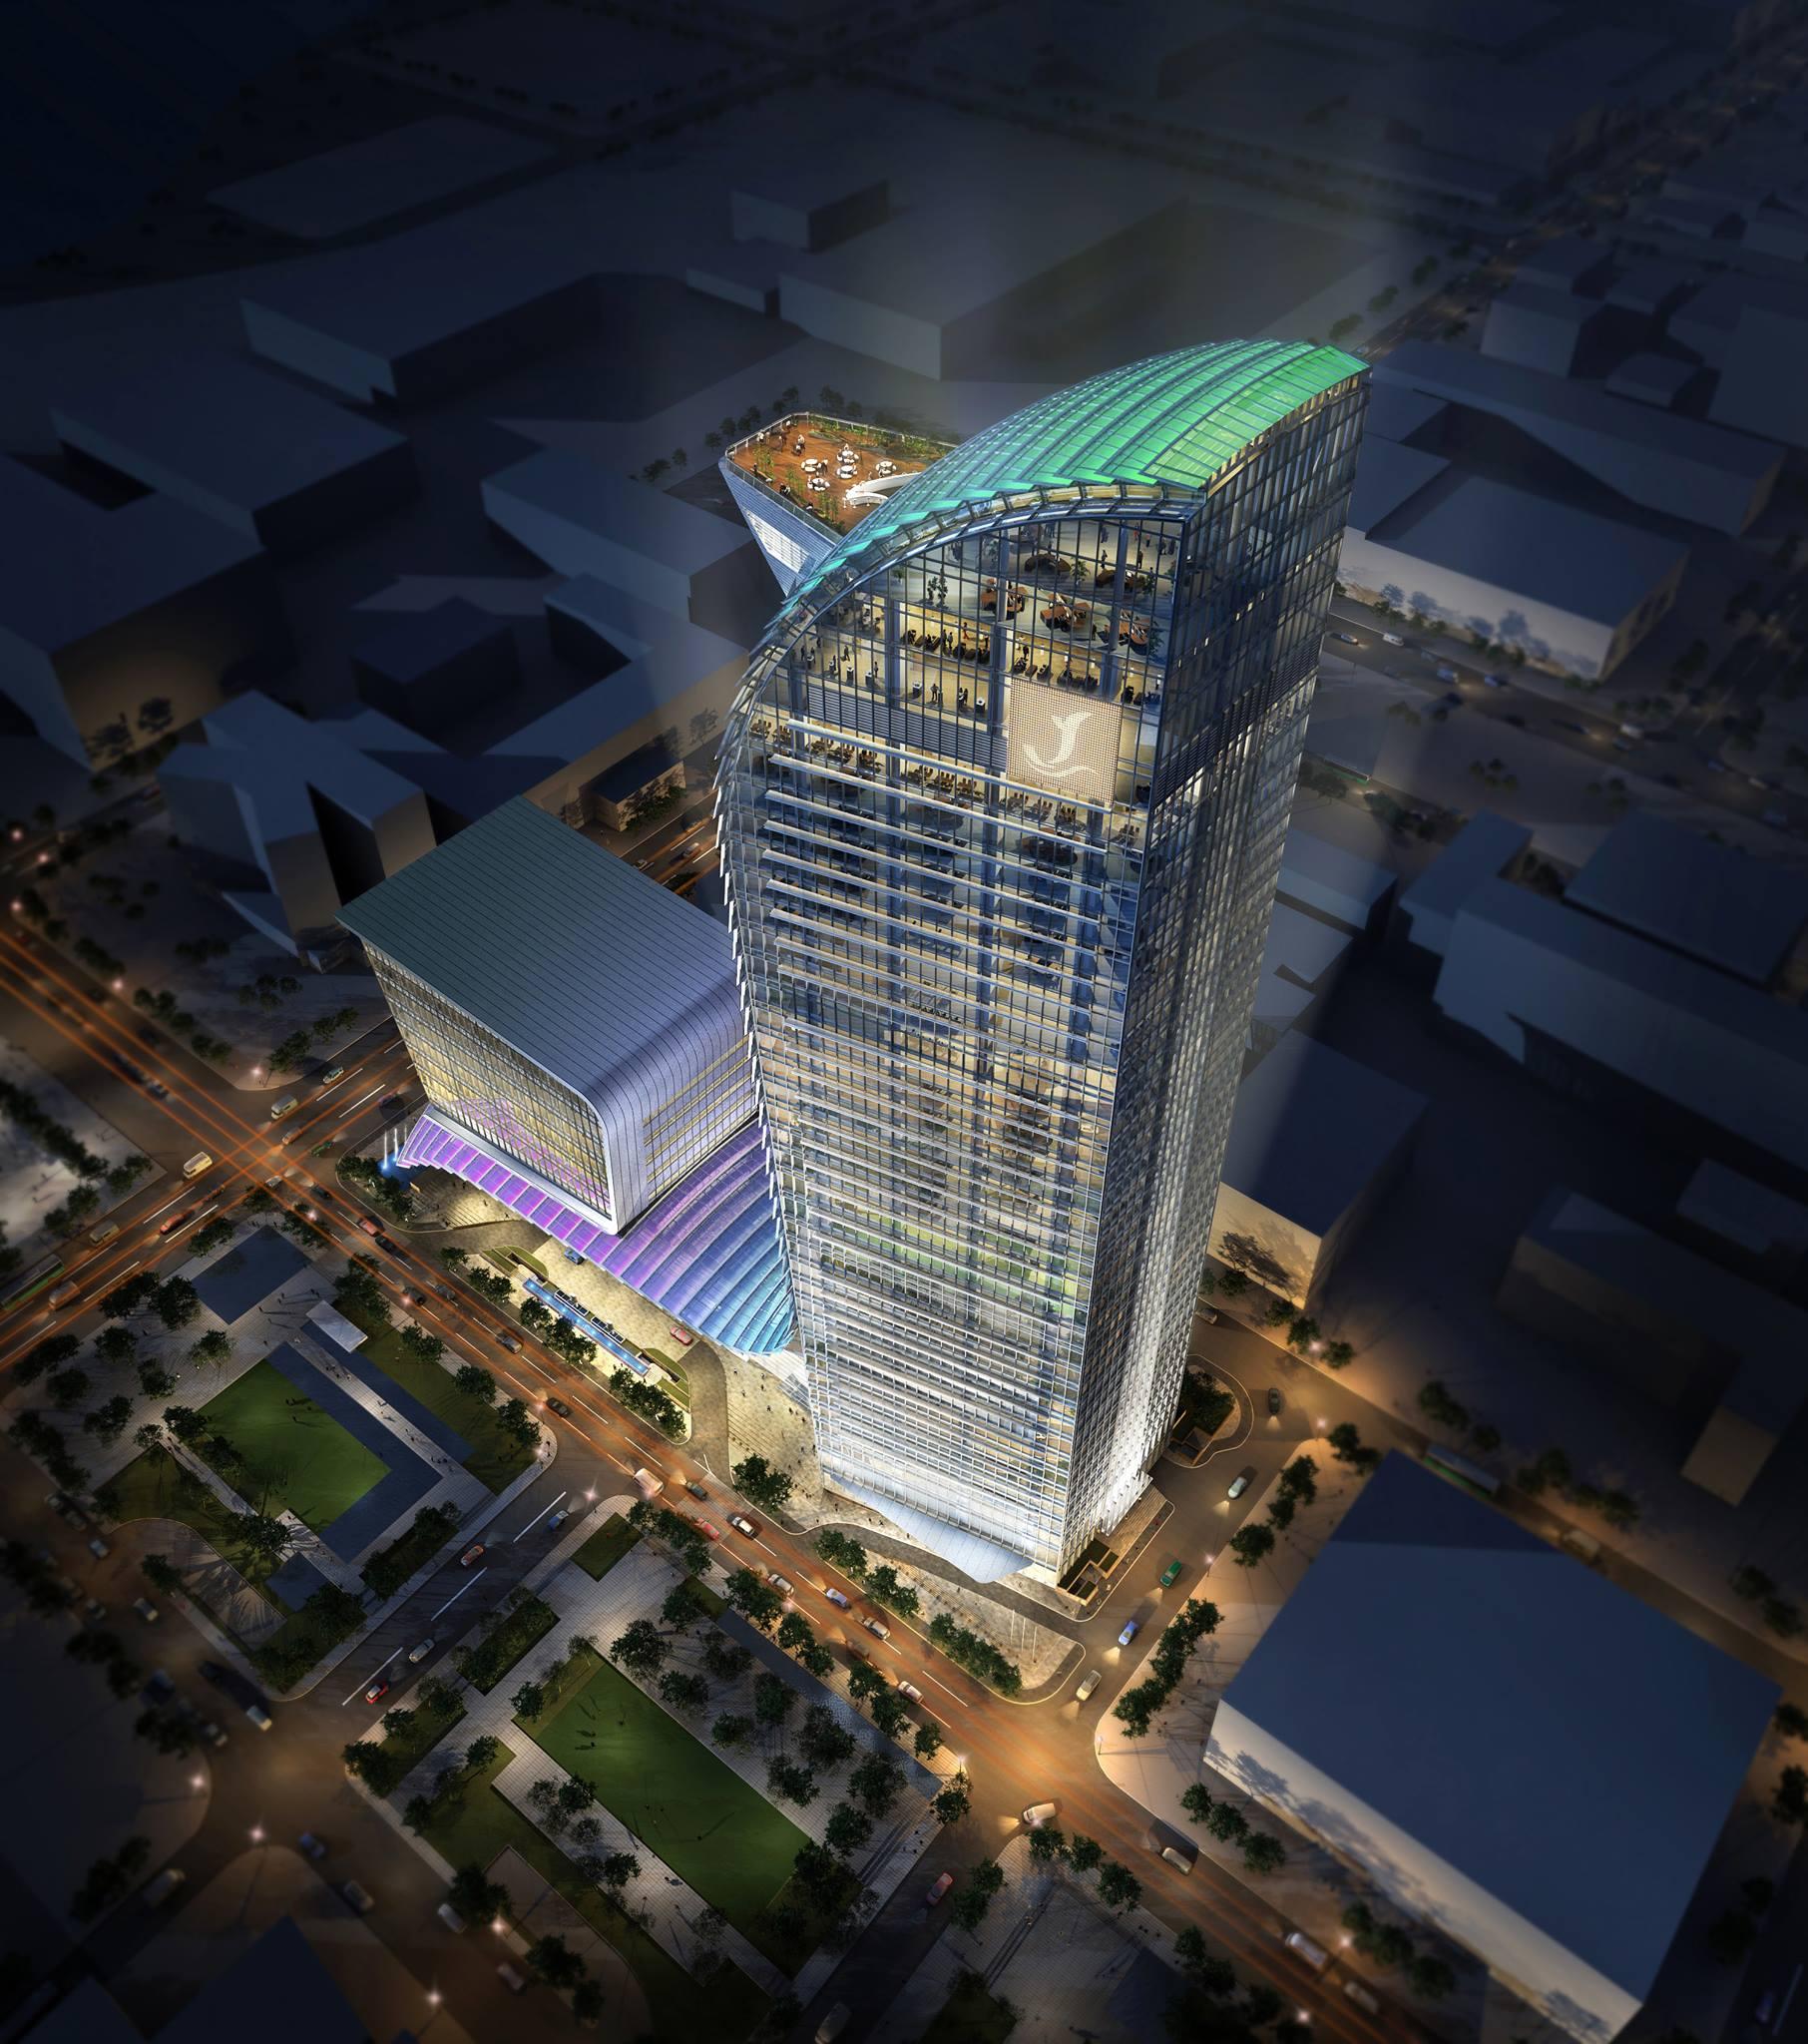 The Rosewood Phnom Penh is set on the top 14 floors of Cambodia's tallest building